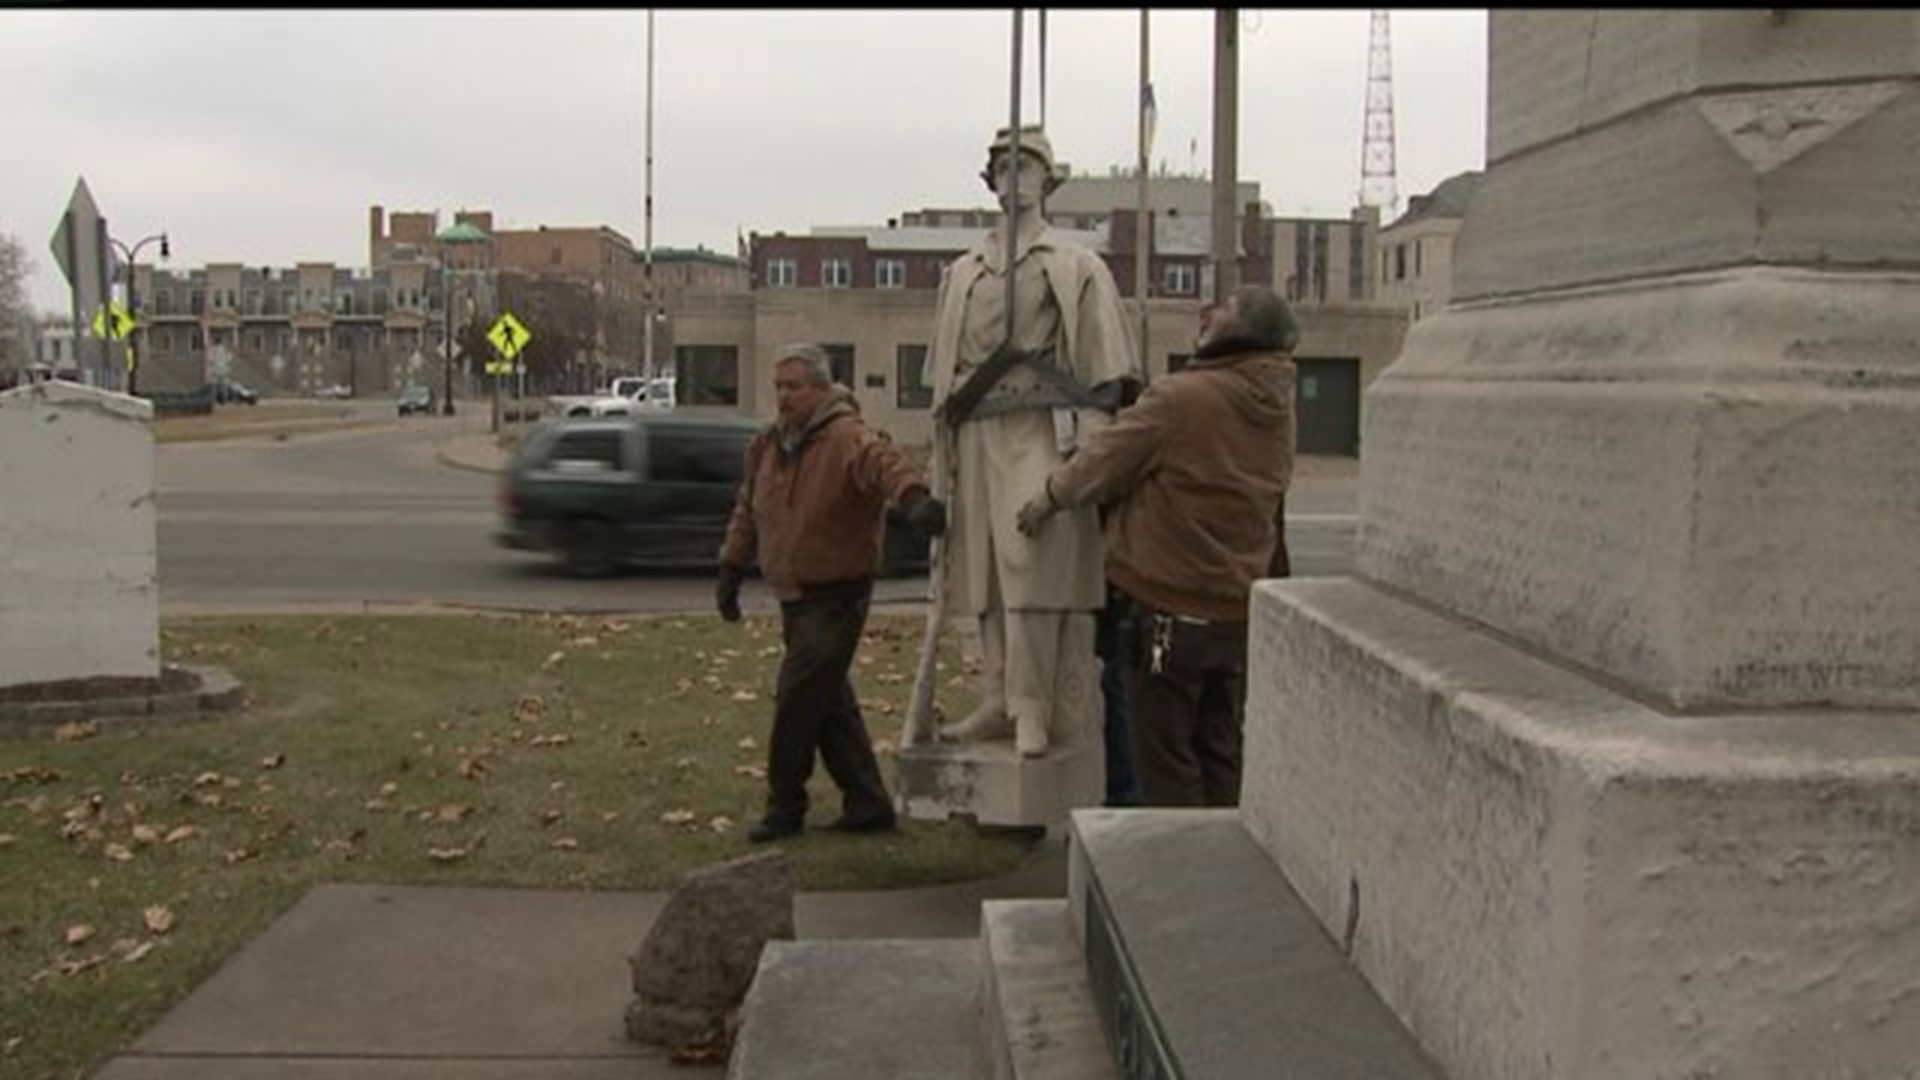 Historic Statue finds Temporary Home